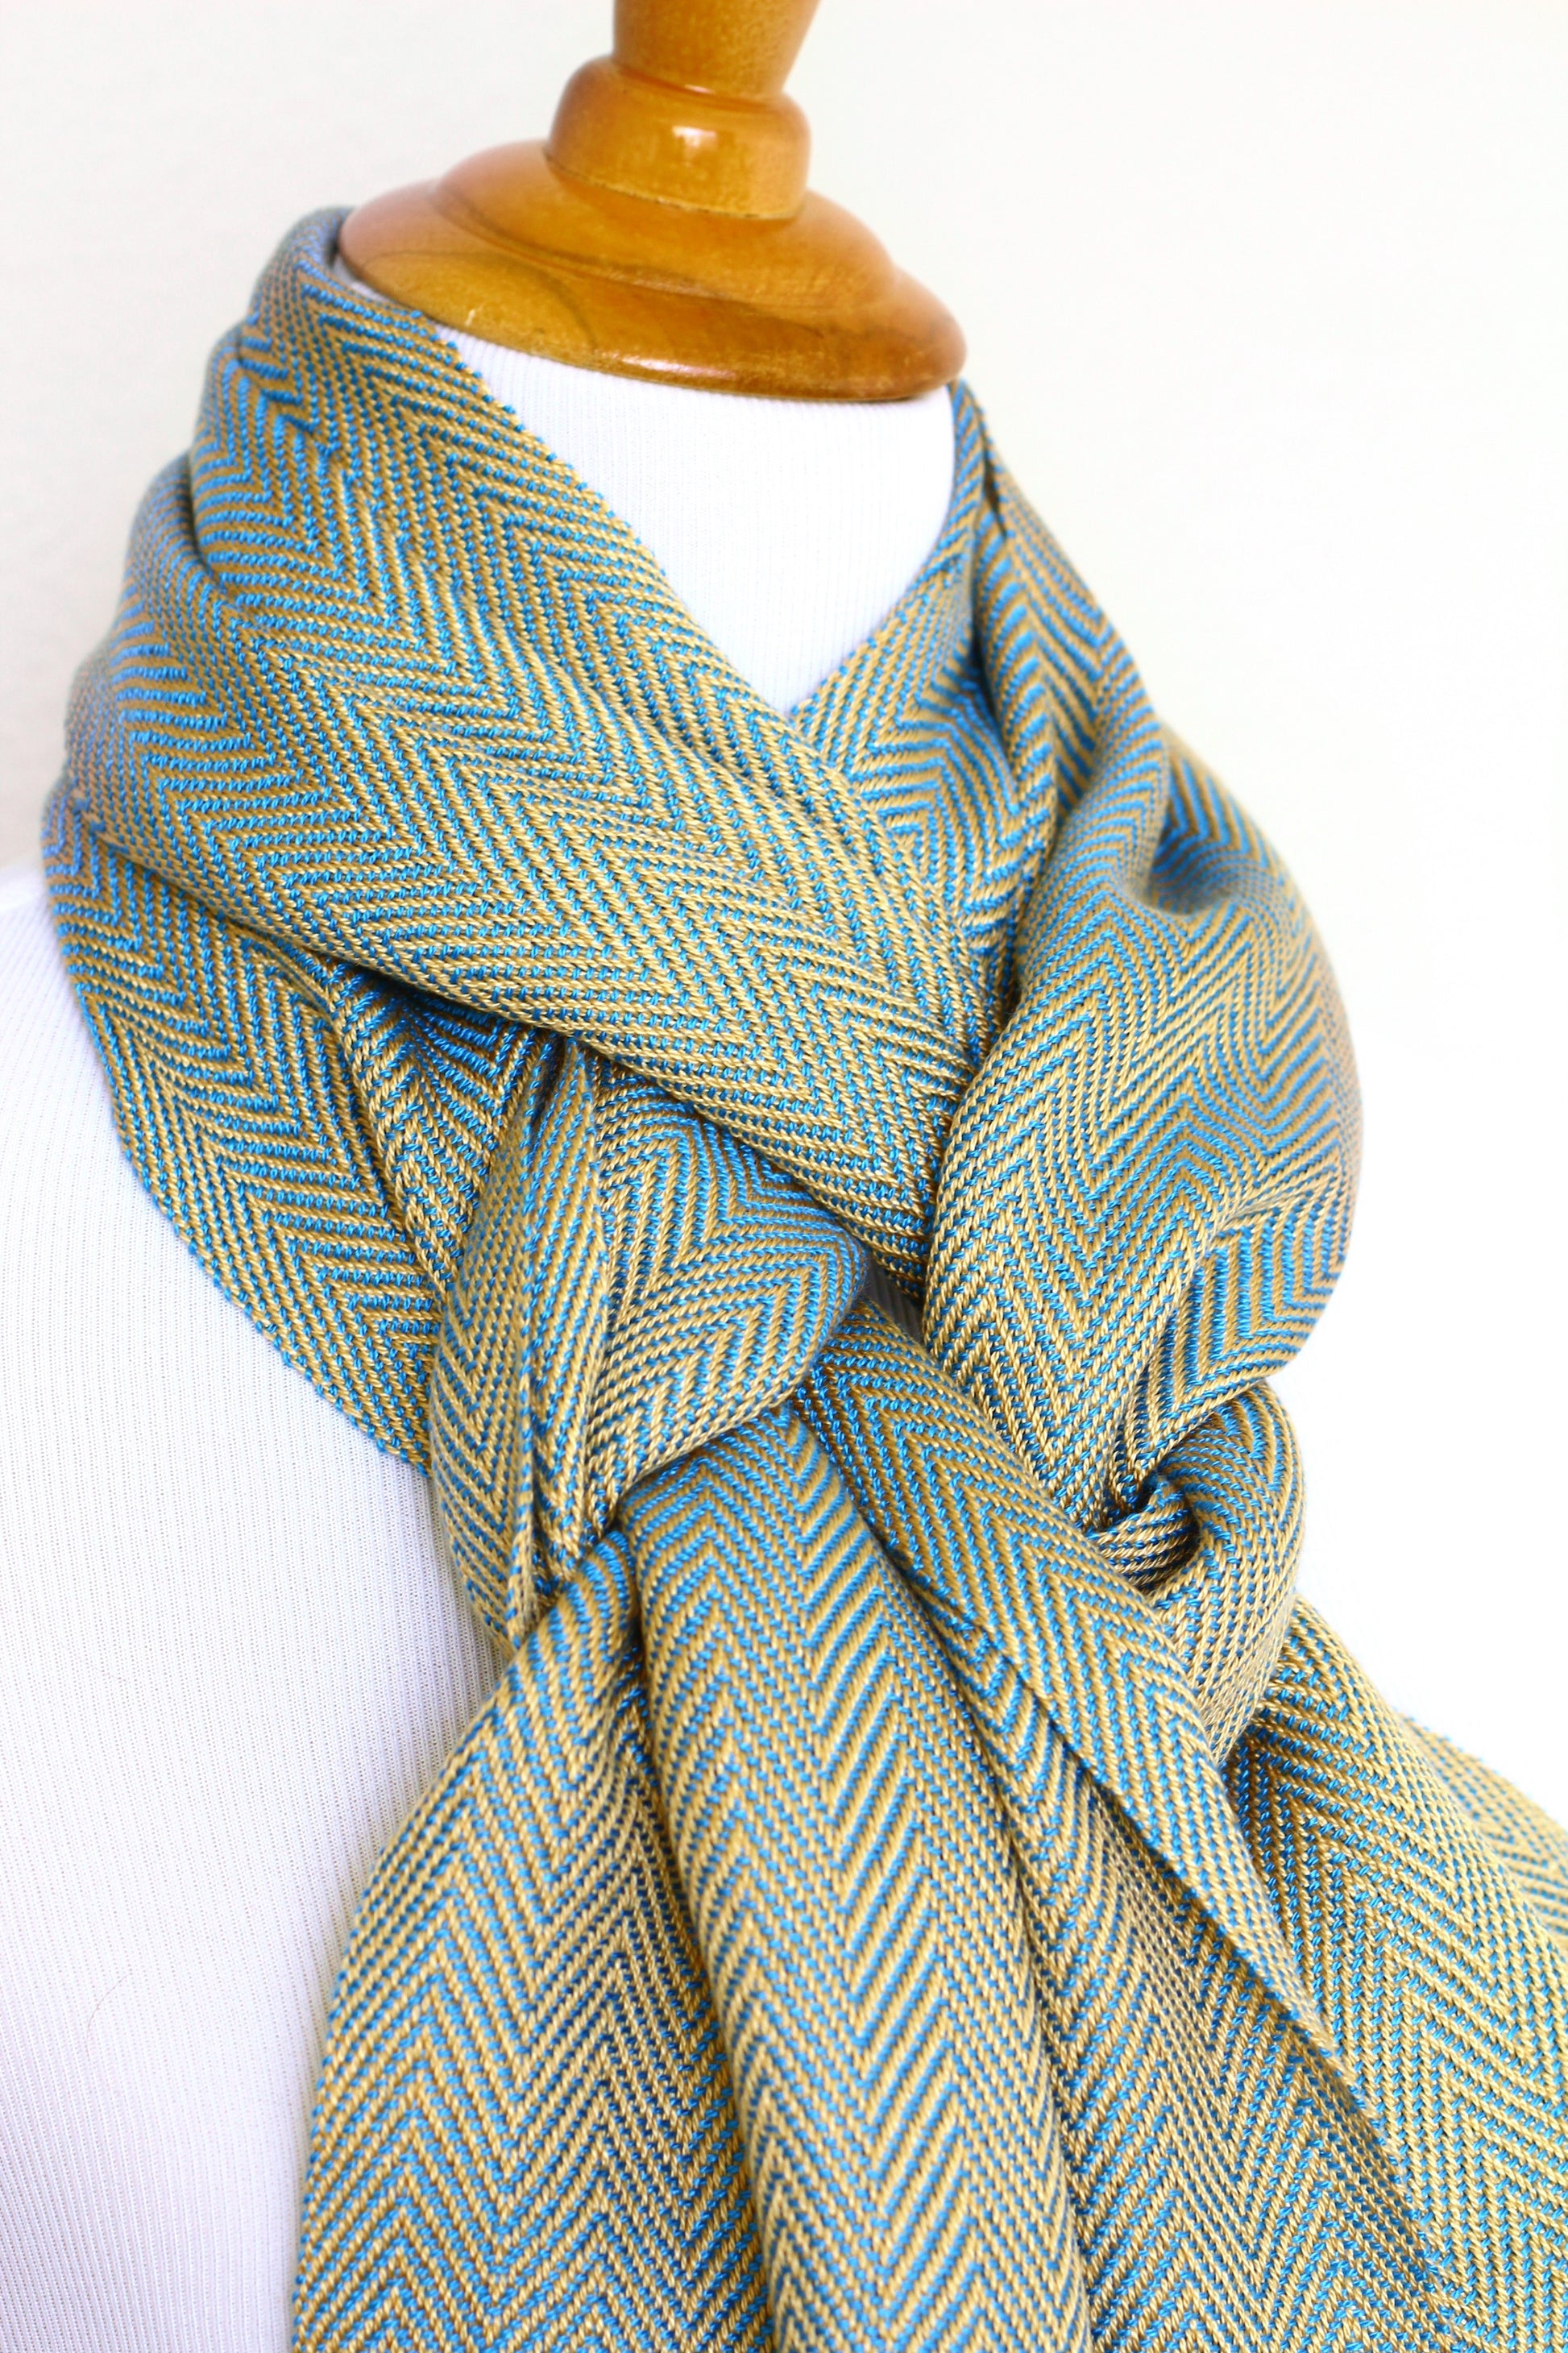 Woven scarf in gold and blue color with twill pattern, long scarf with fringe